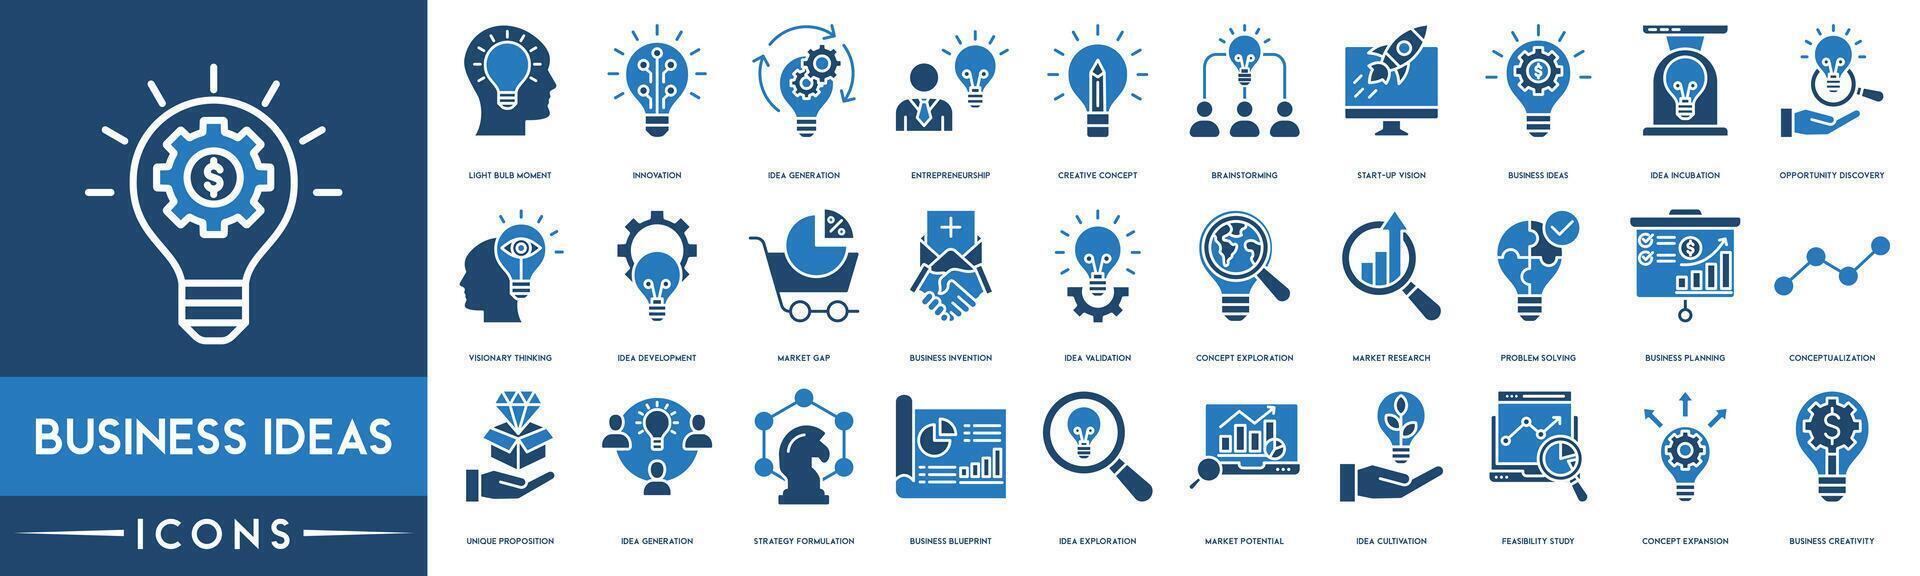 Business Ideas icon set. Innovation, Innovation, Market Research, Problem Solving, Business Planning, Business Blueprint, Concept Expansion and Business Creativity line icon. vector